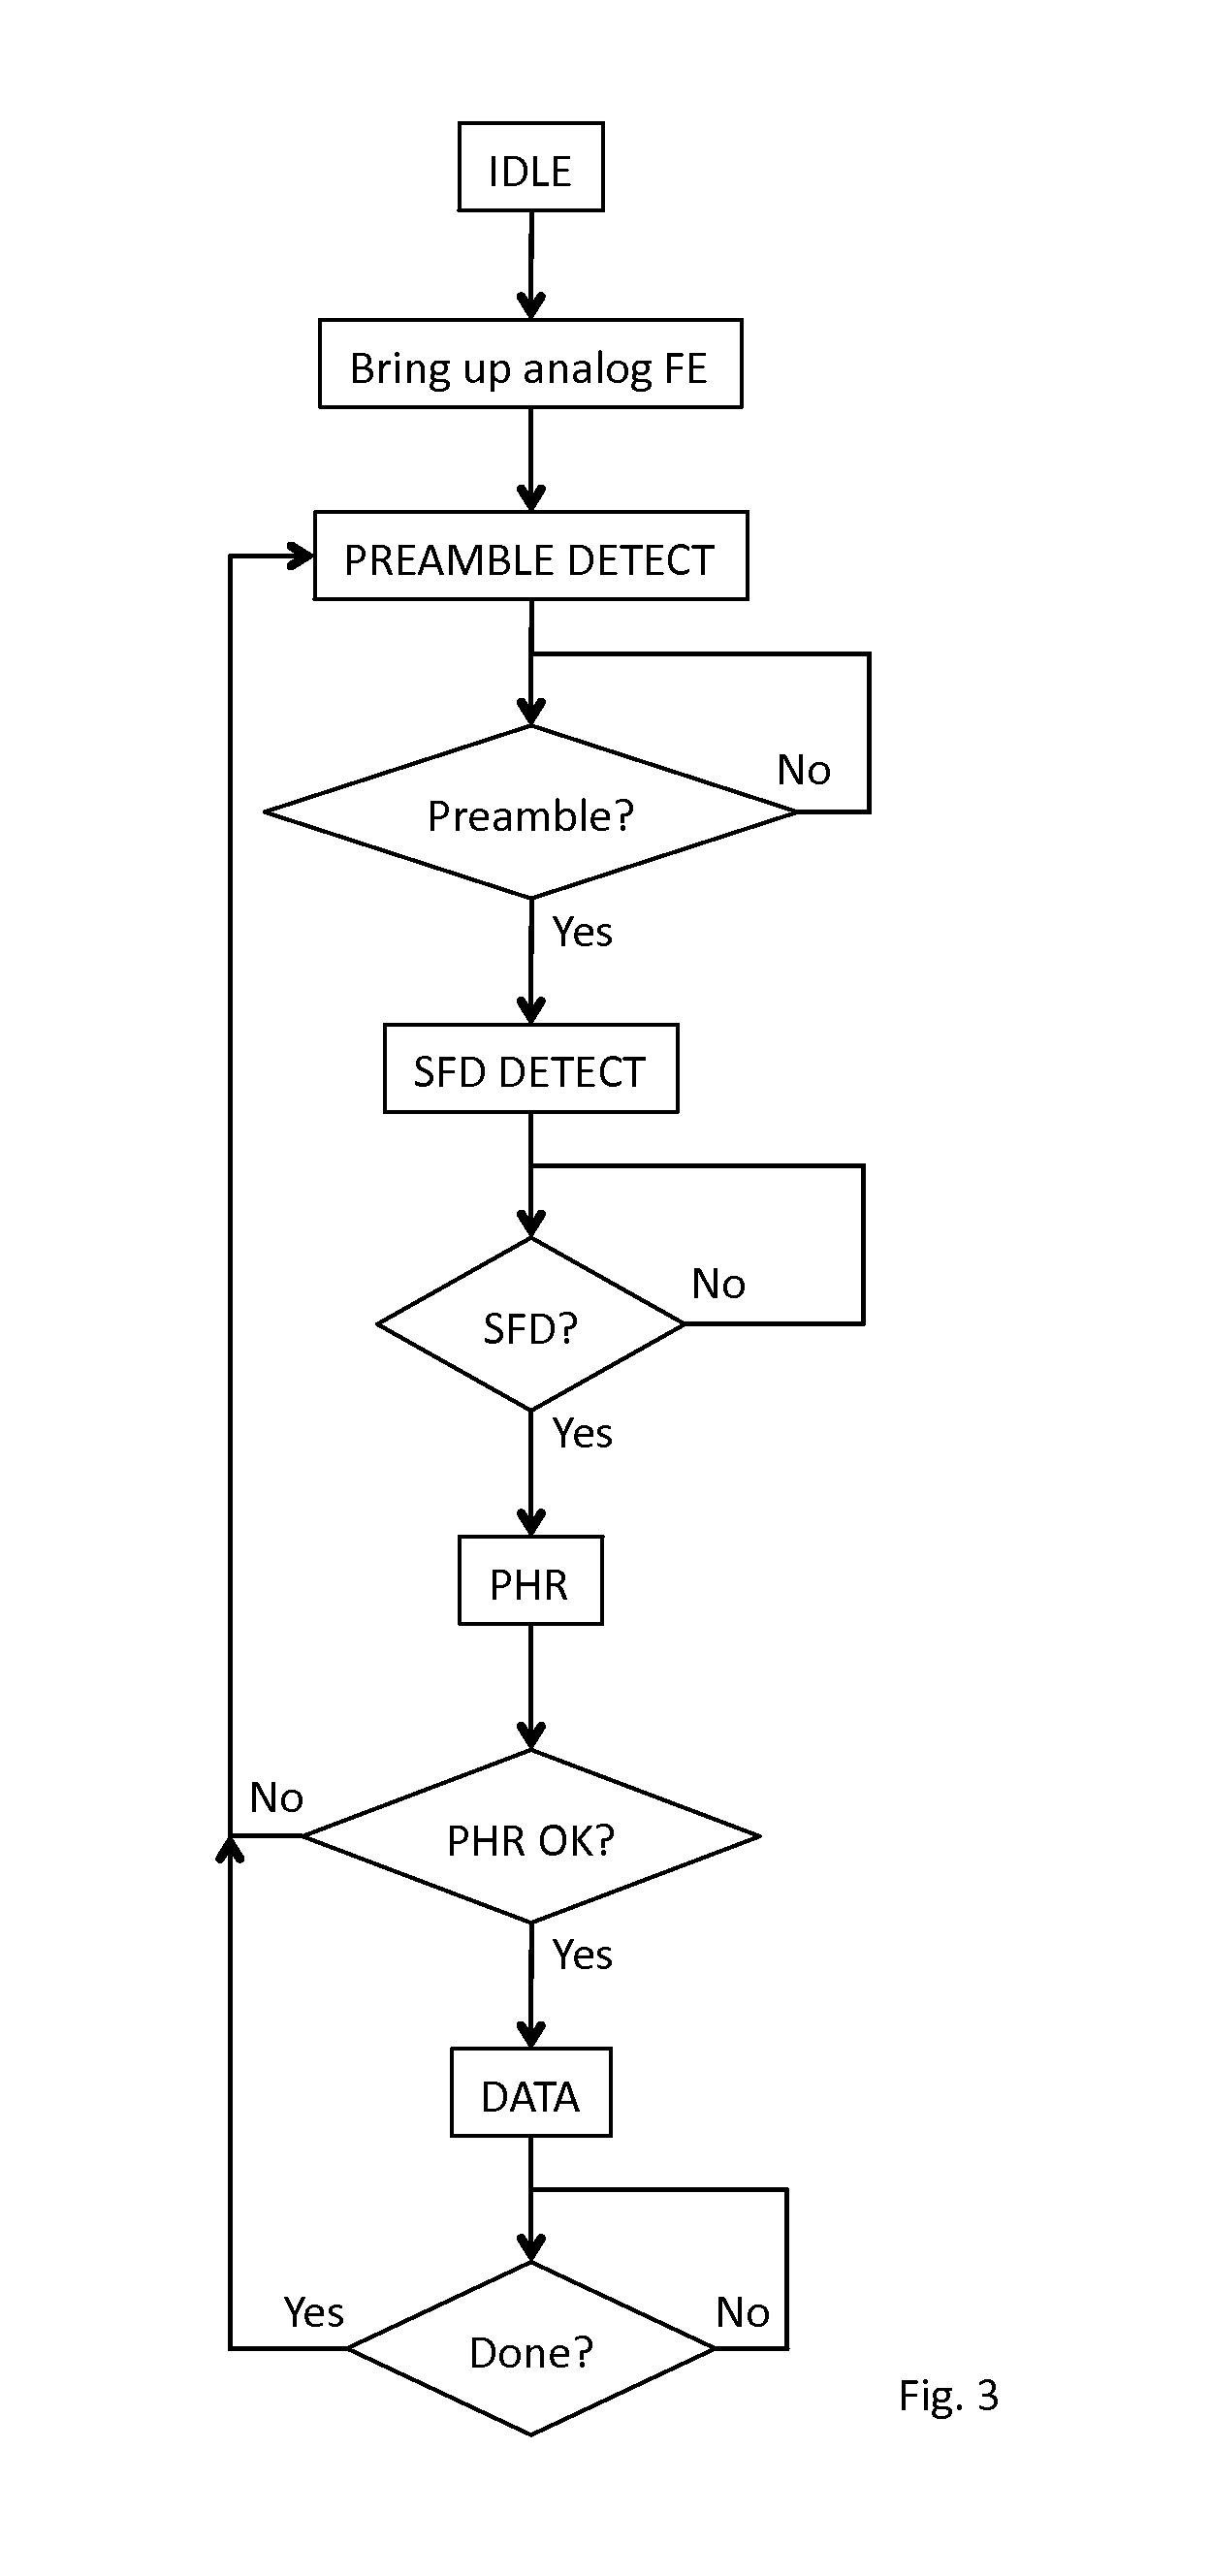 Receiver For Use In An Ultra-Wideband Communication System